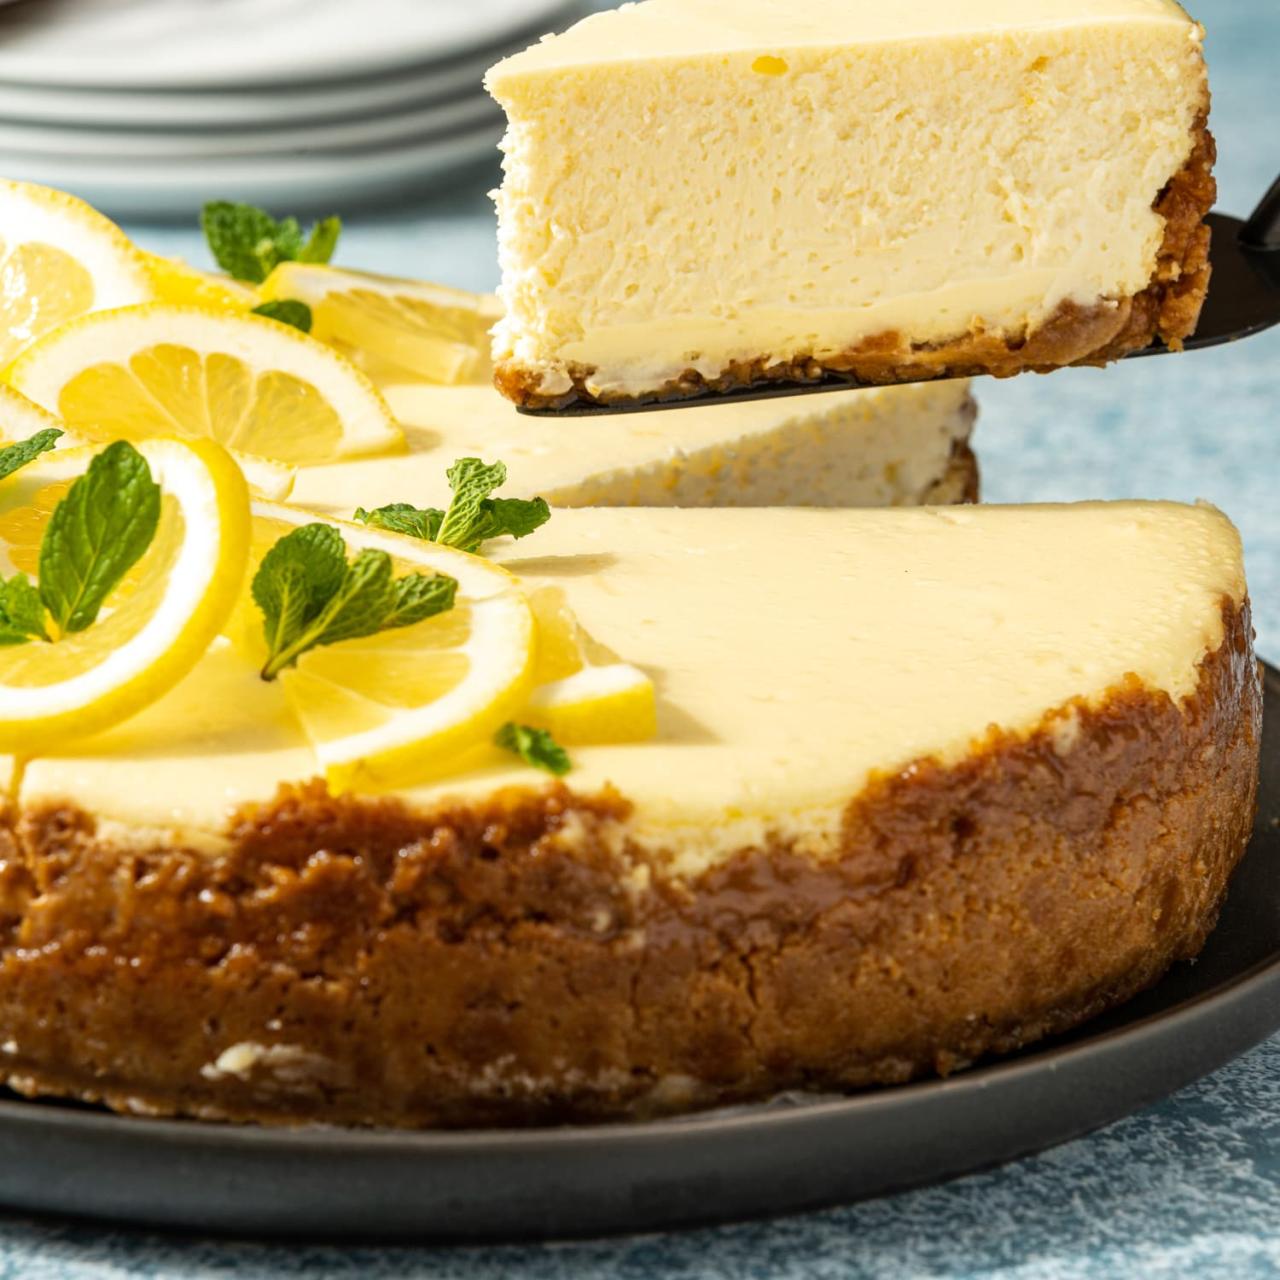 Lemon Cheesecake Recipe (with Gingersnap Crust) | The Kitchn